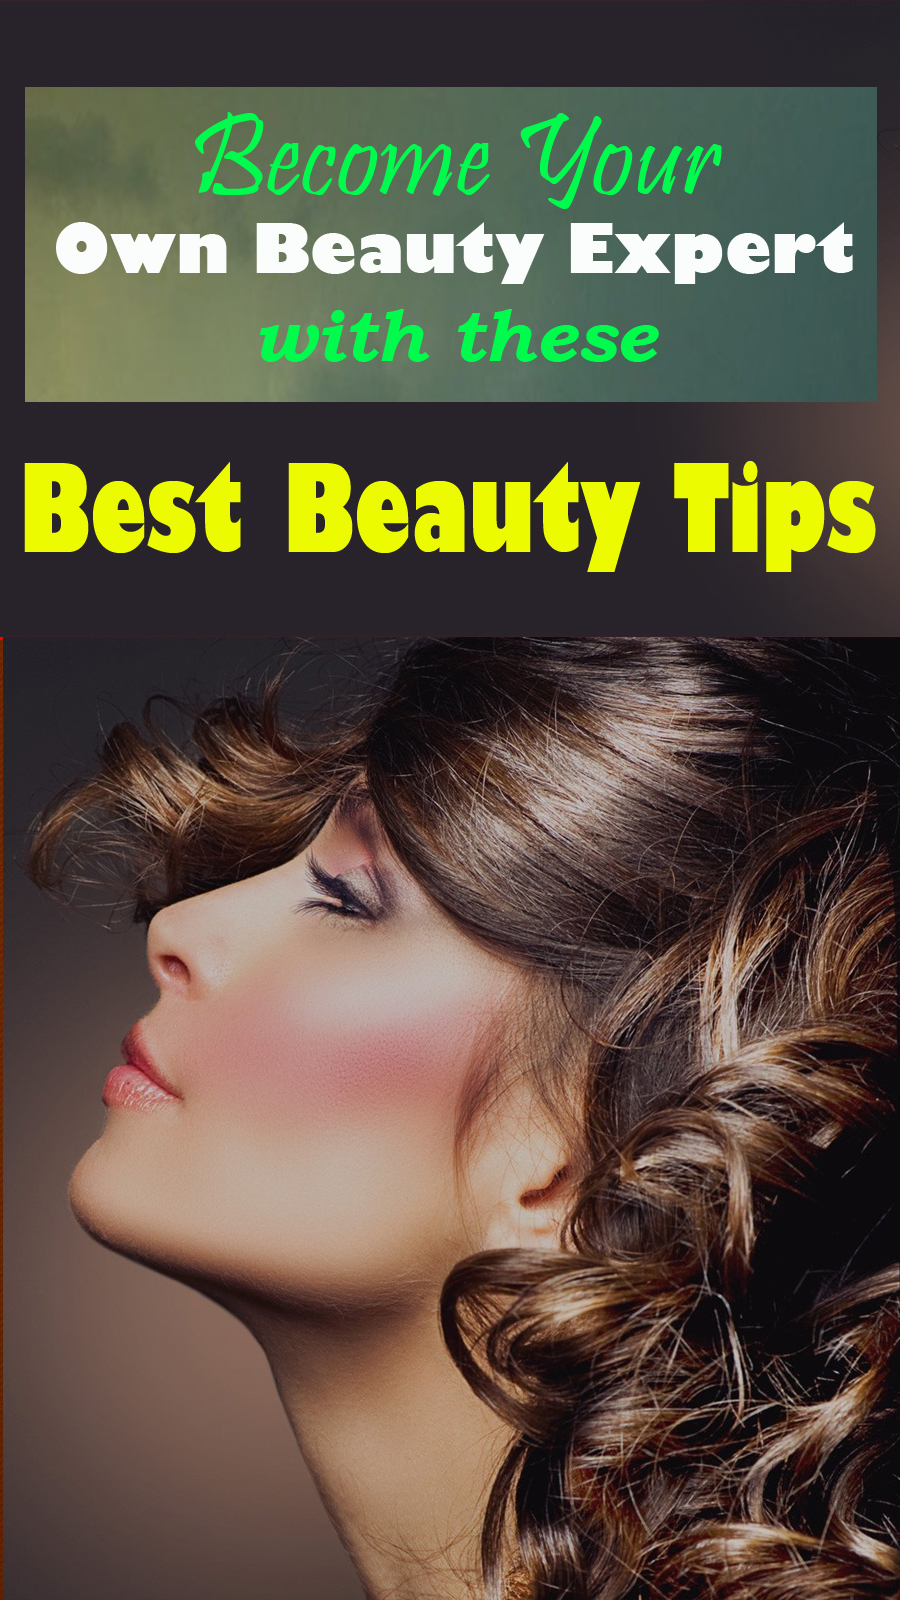 Become Your Own Beauty Expert with these 5 Best Beauty Tips